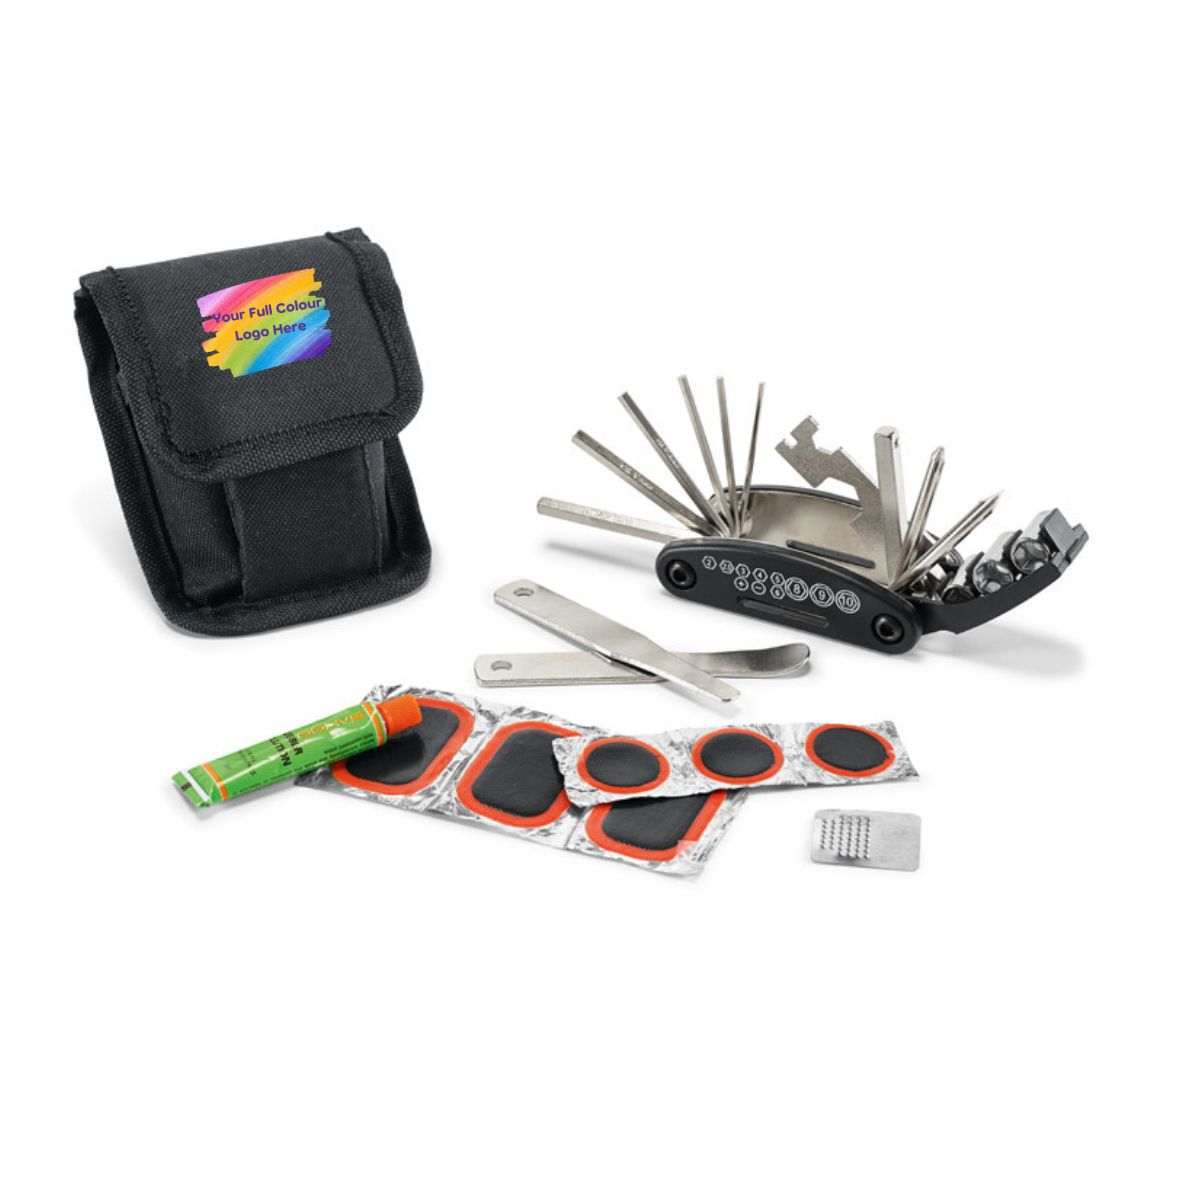 Cycle Tool Kit, full colour print example